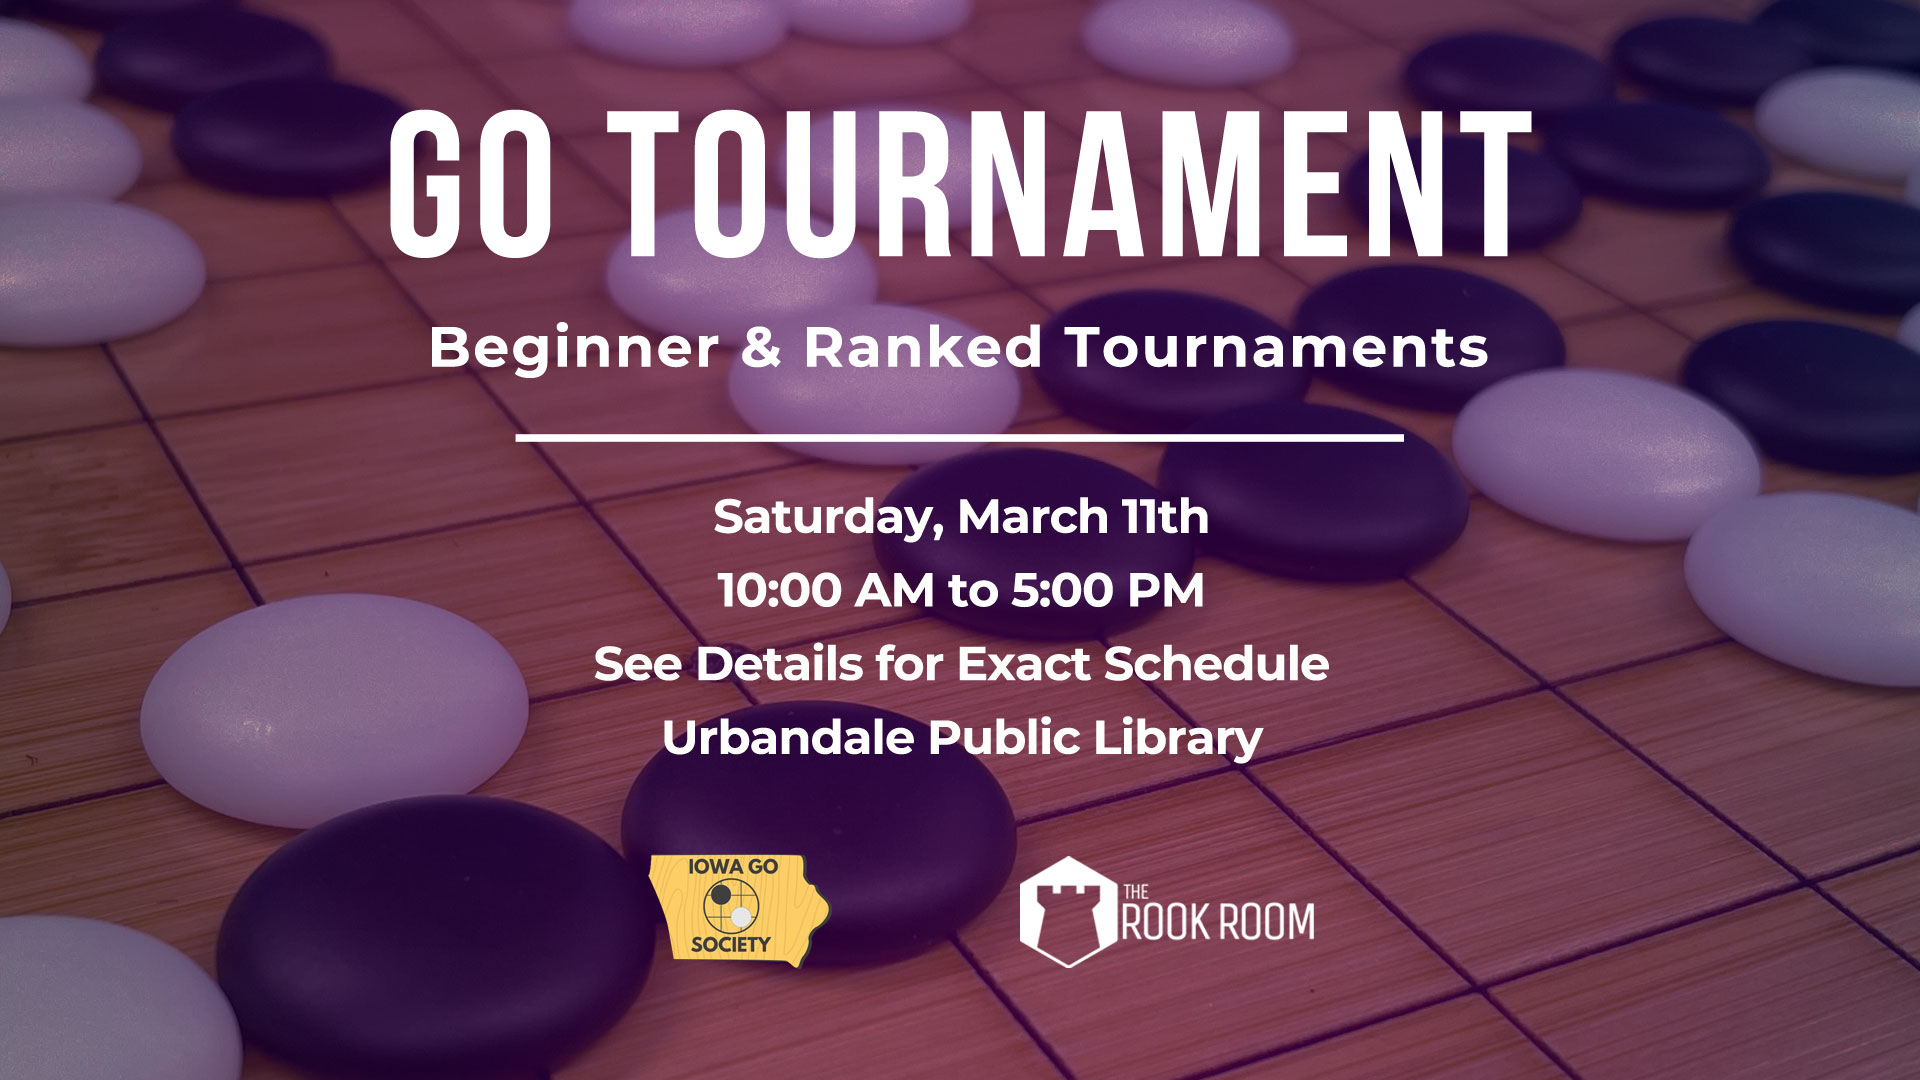 Iowa Go Society and Rook Room Go Tournament March 11, 2023 Event Image